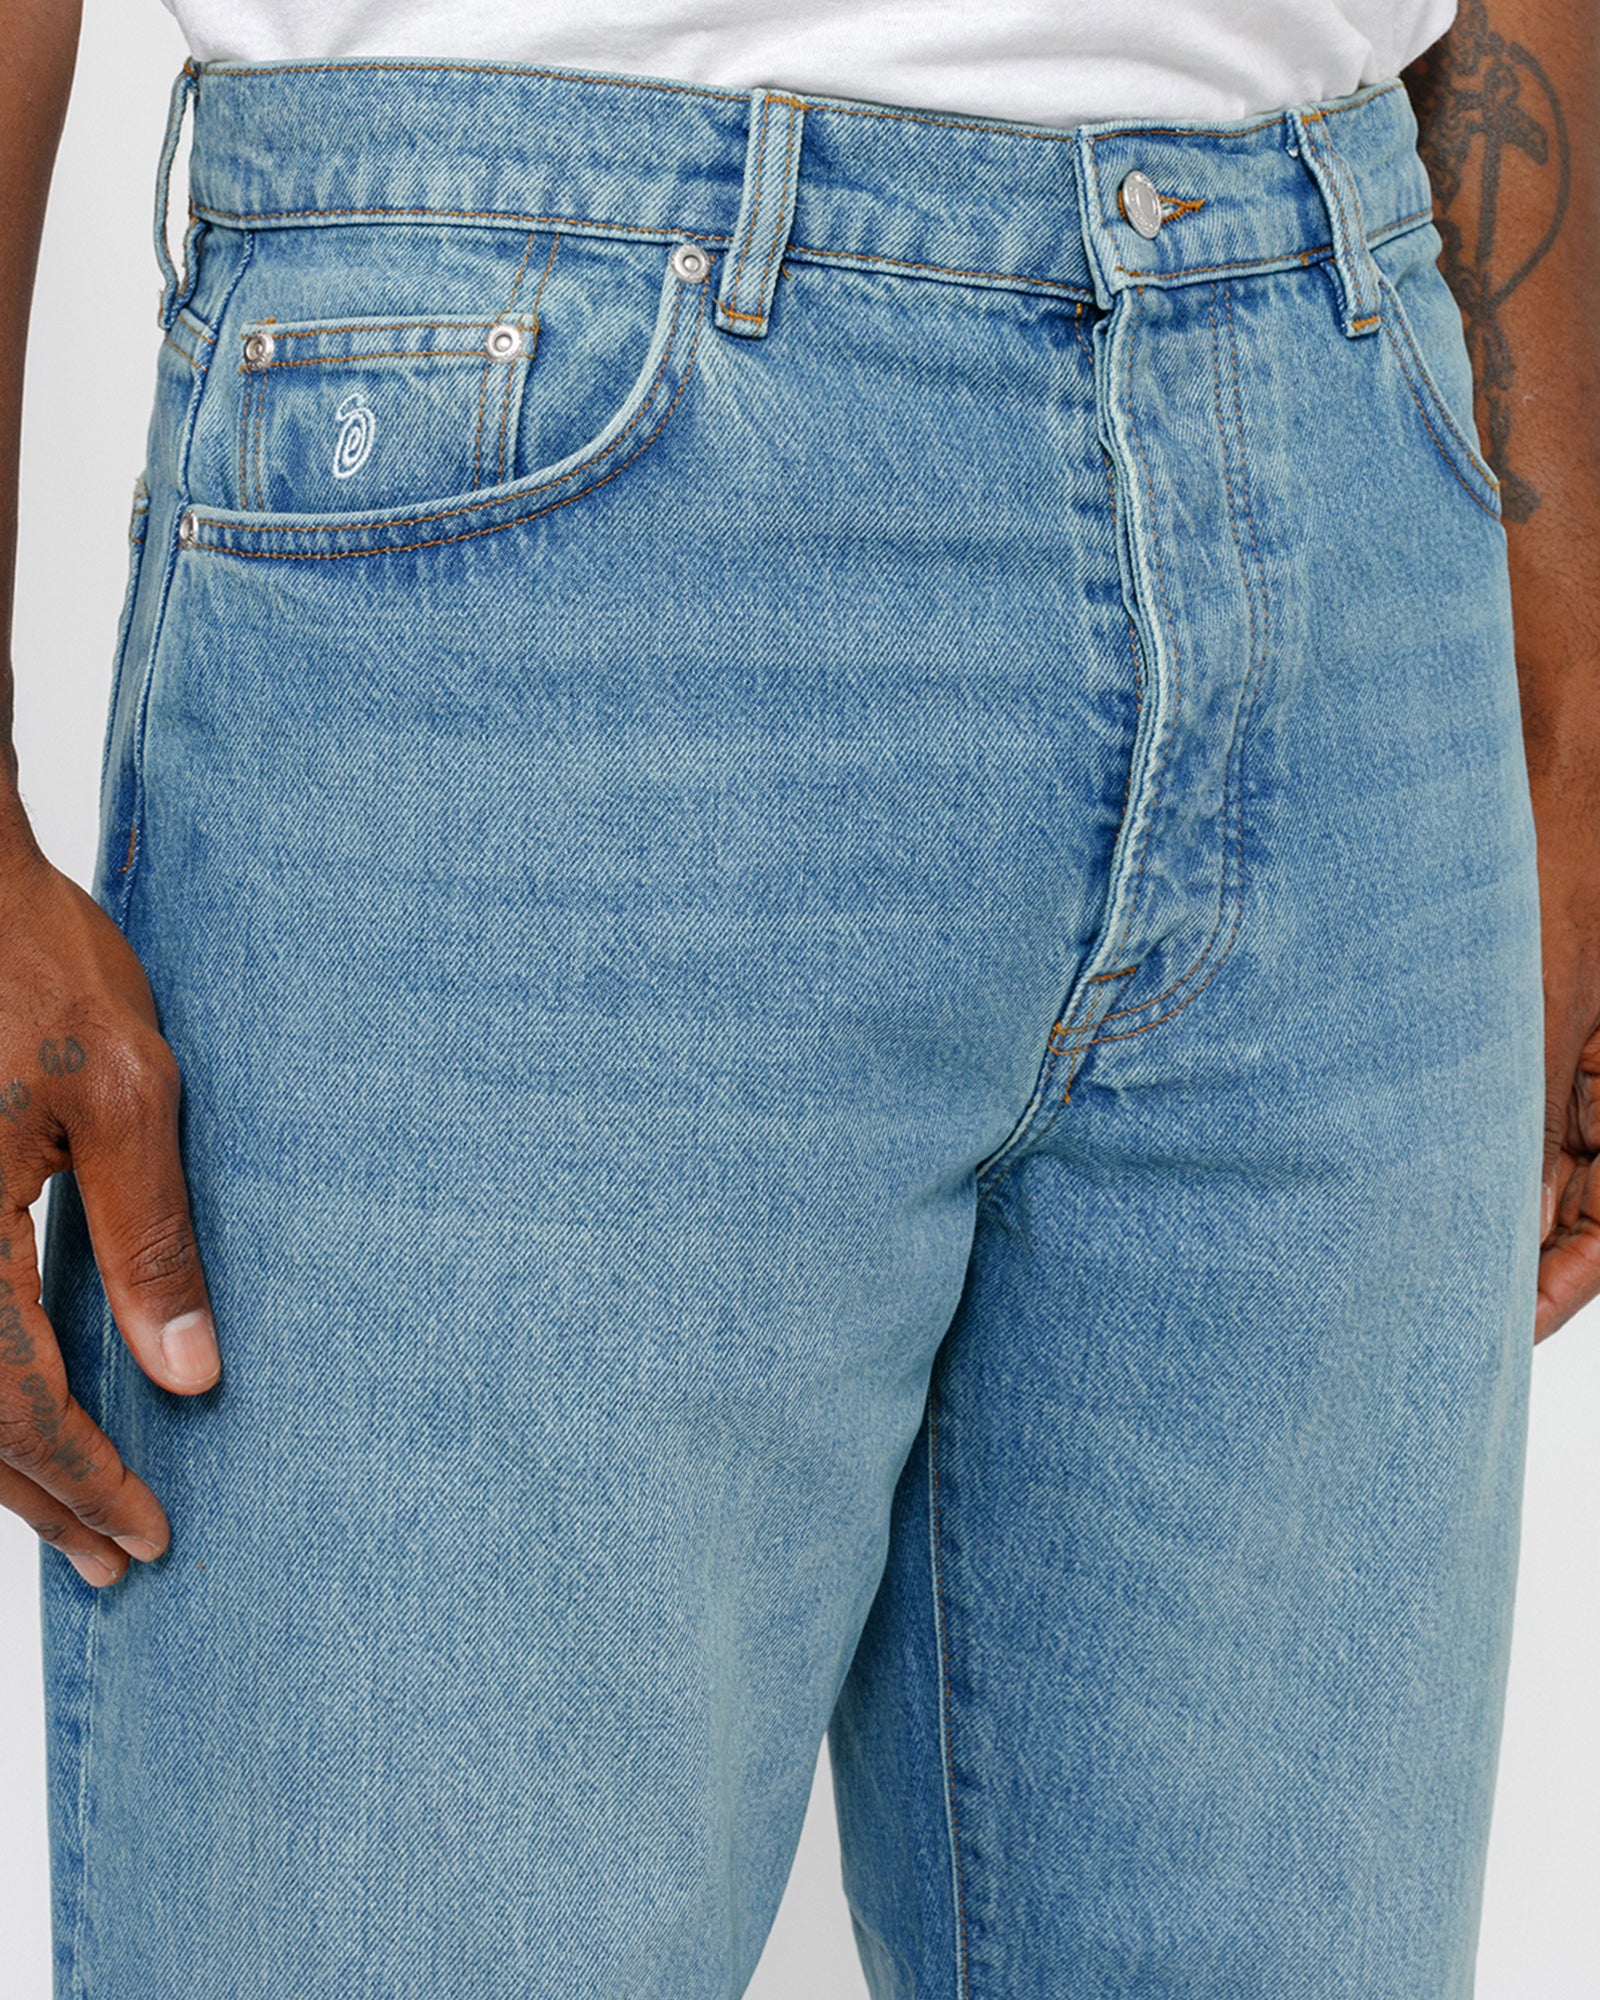 Denim Wash | Thread Recommendations & Washes Process for Jeans - Coats